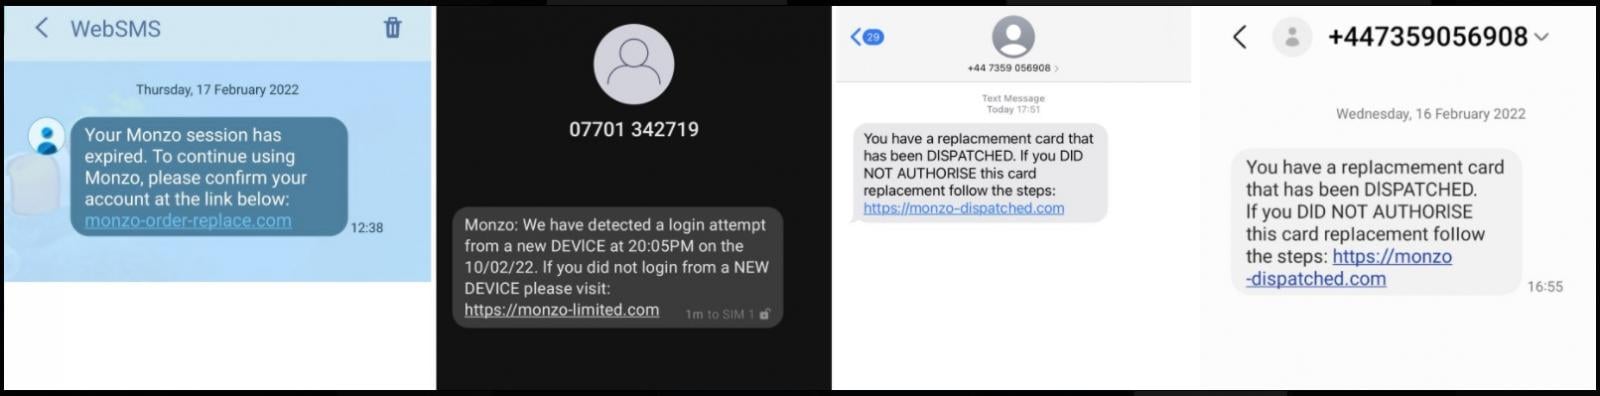 Smishing messages that point to phishing sites